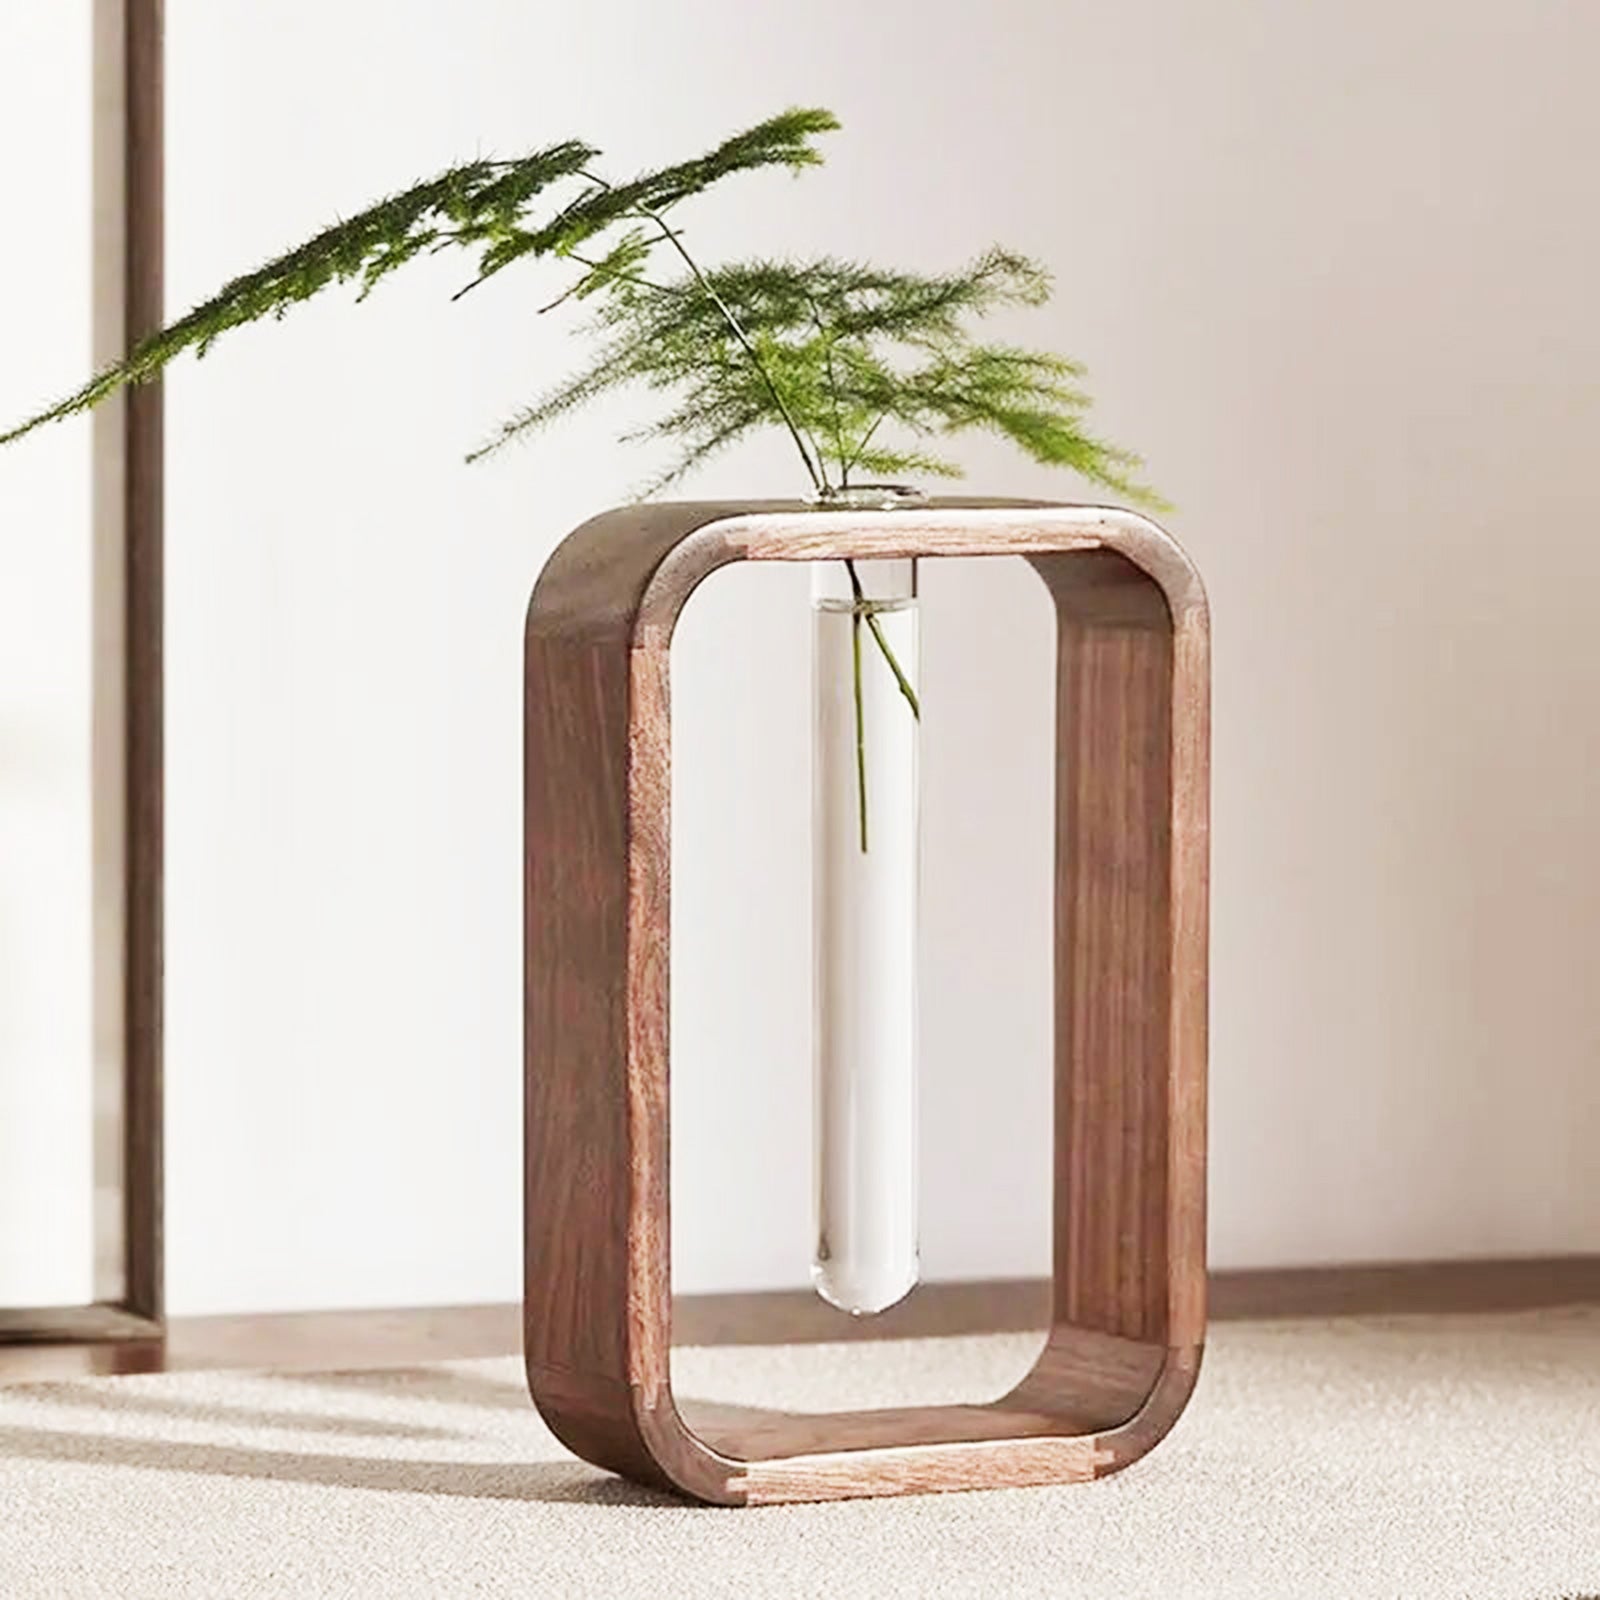 Hydroponics Elegant Nordic-style wooden Vase with Glass Test Tube